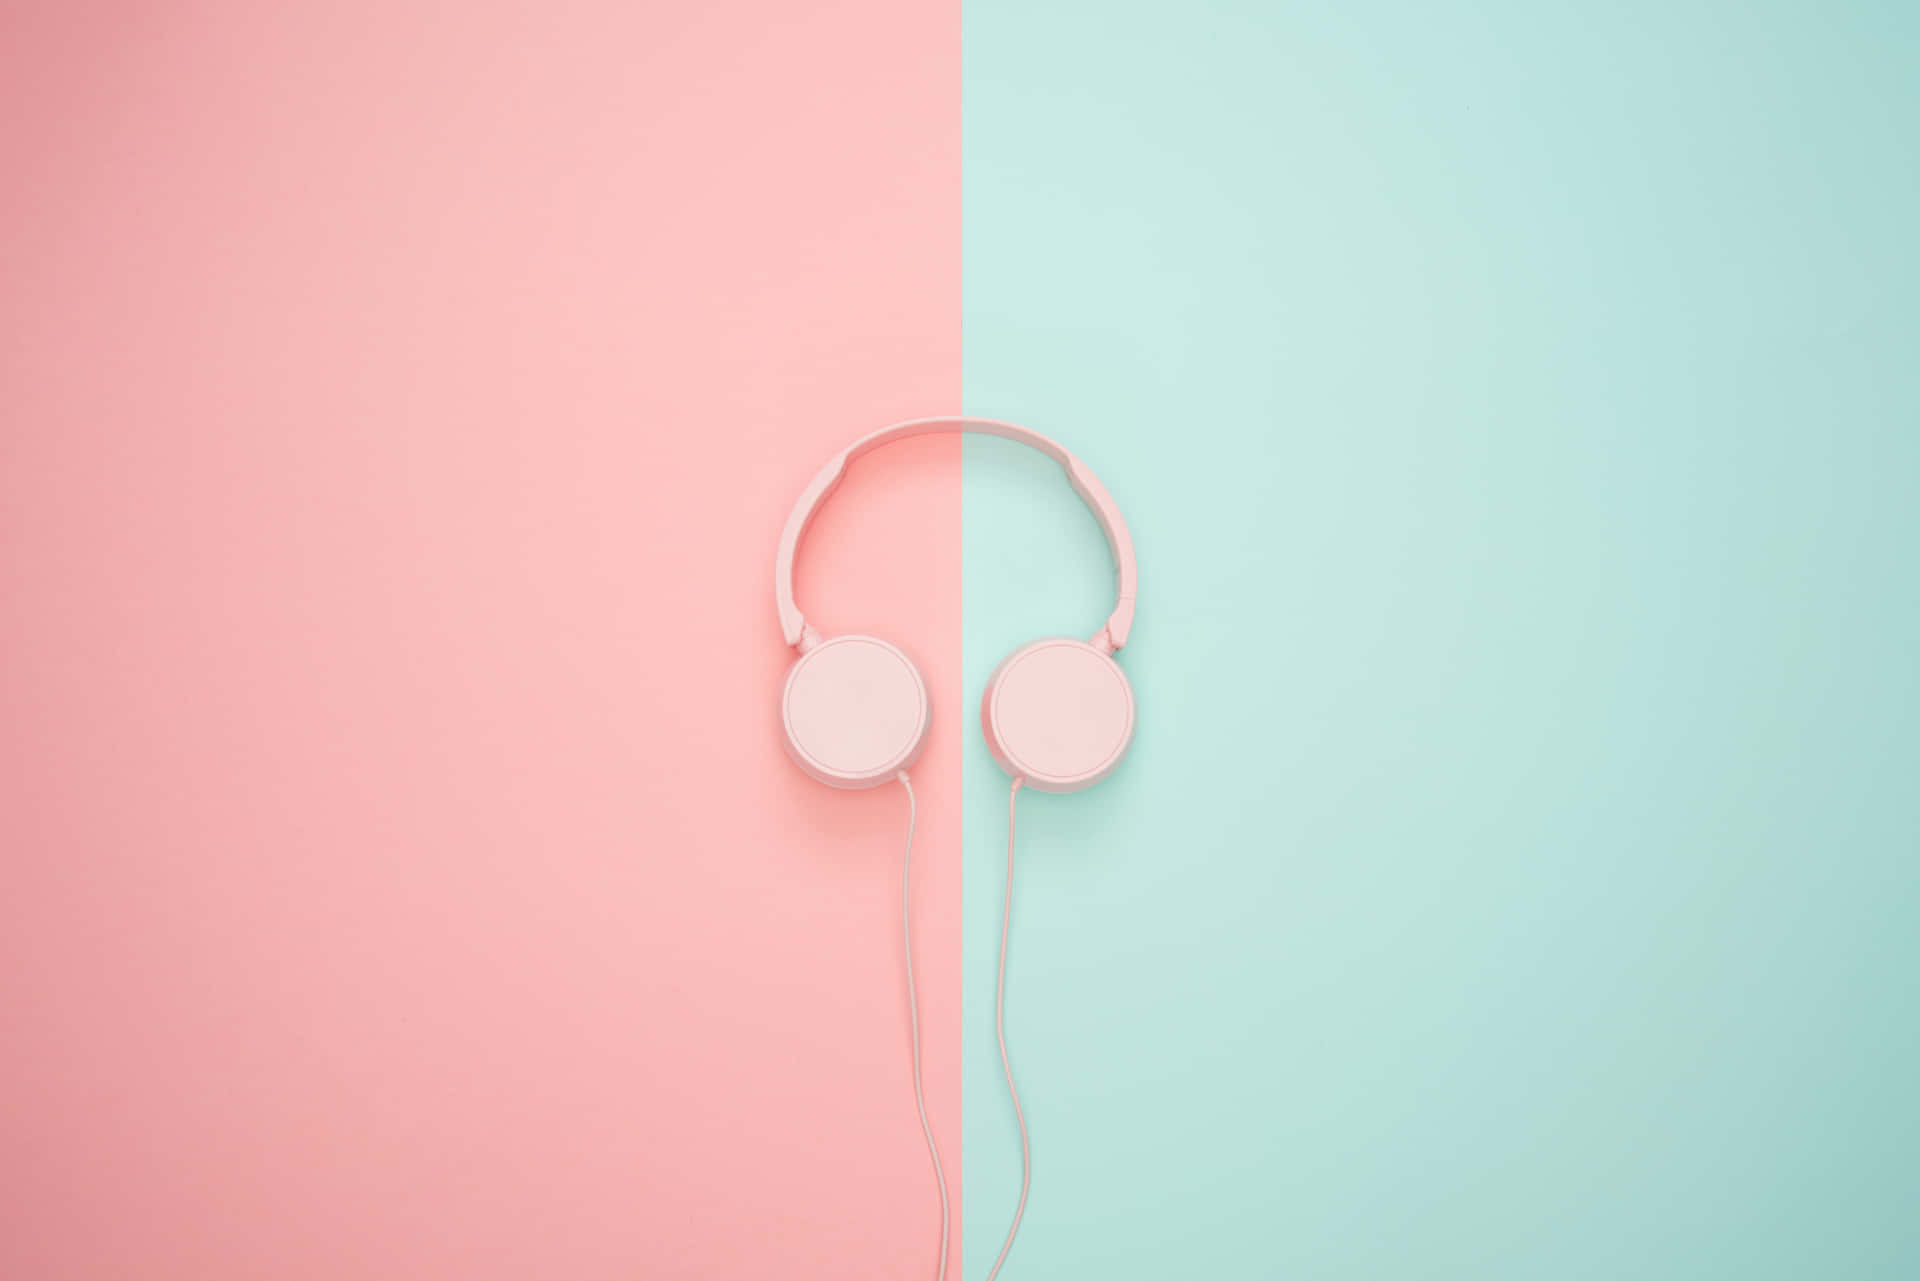 Pink Headphones On A Pink And Blue Background Wallpaper